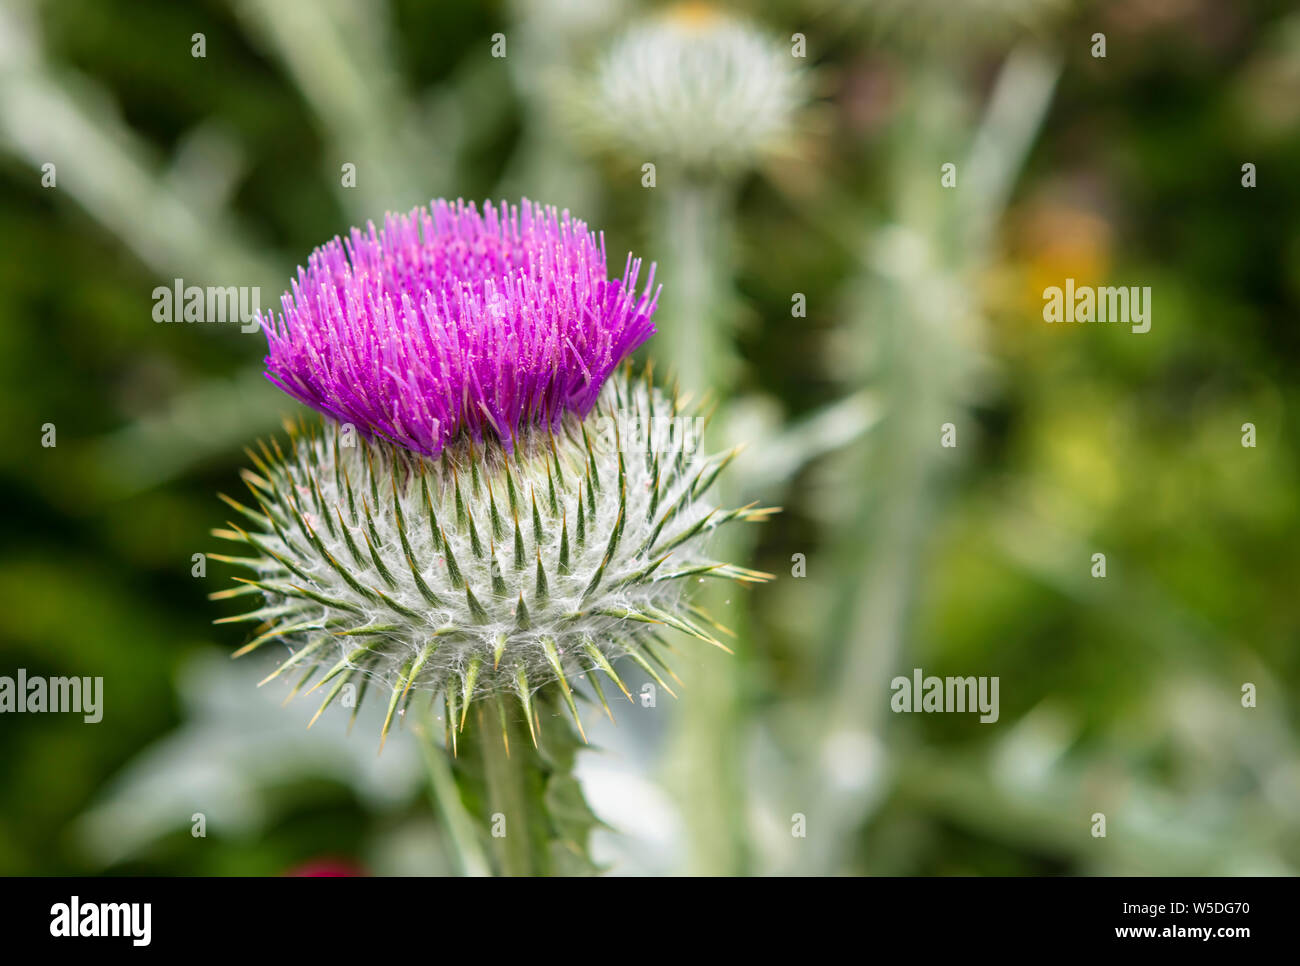 Cirsium vulgare is dramatic purple thistle plant in a garden. Stock Photo